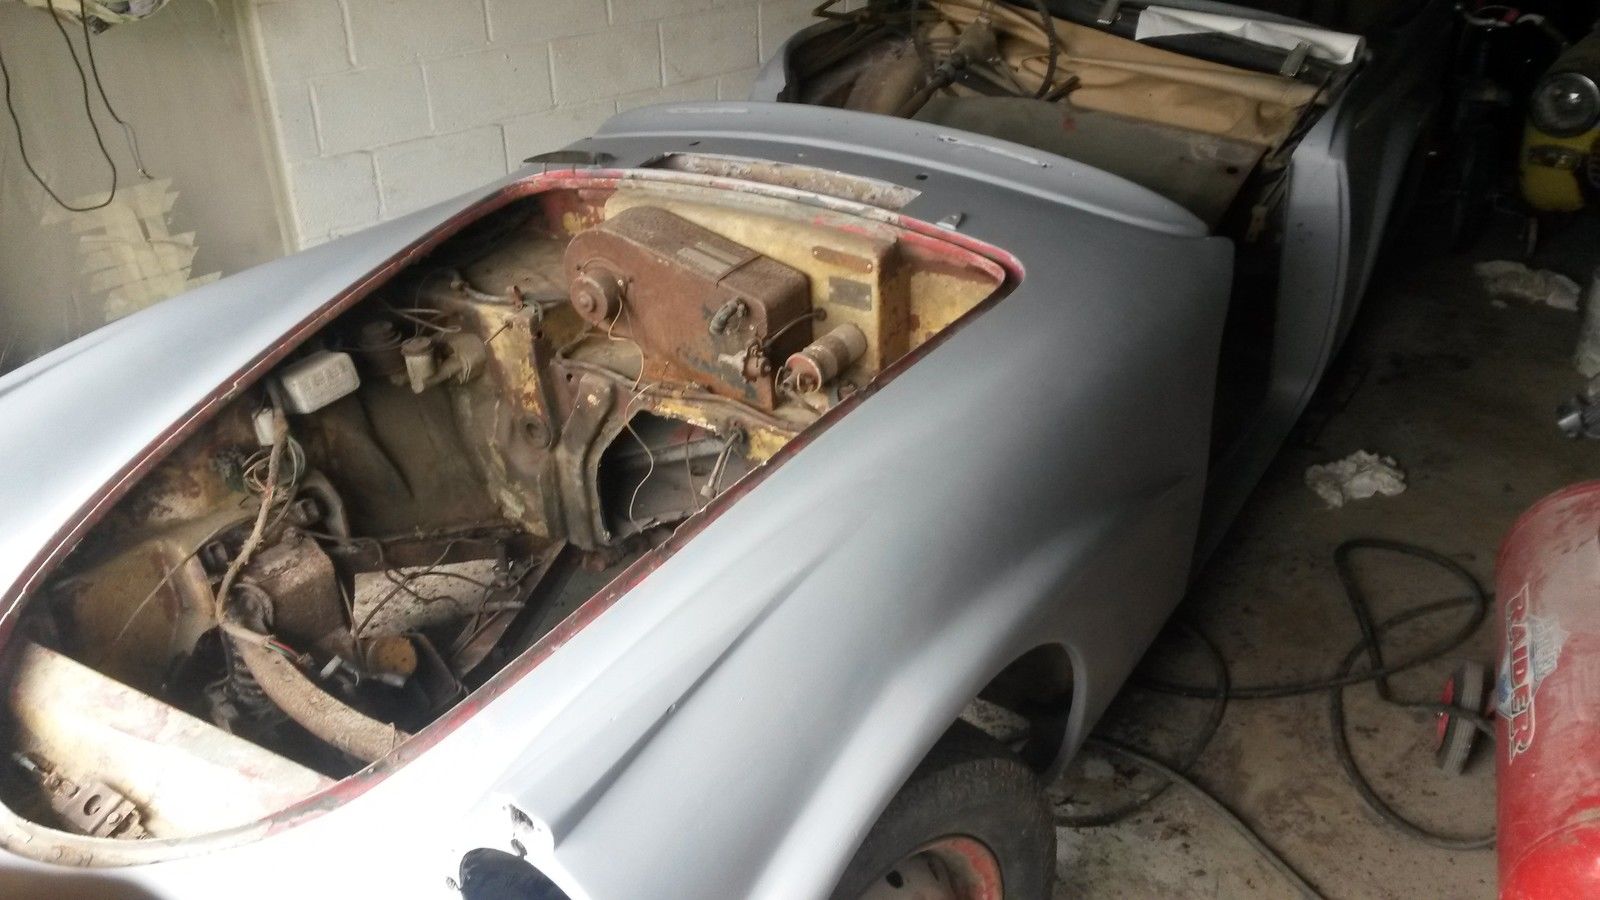 Further stripping down for restoration will be necessary. The car is in transportable condition. (Picture courtesy eBay).